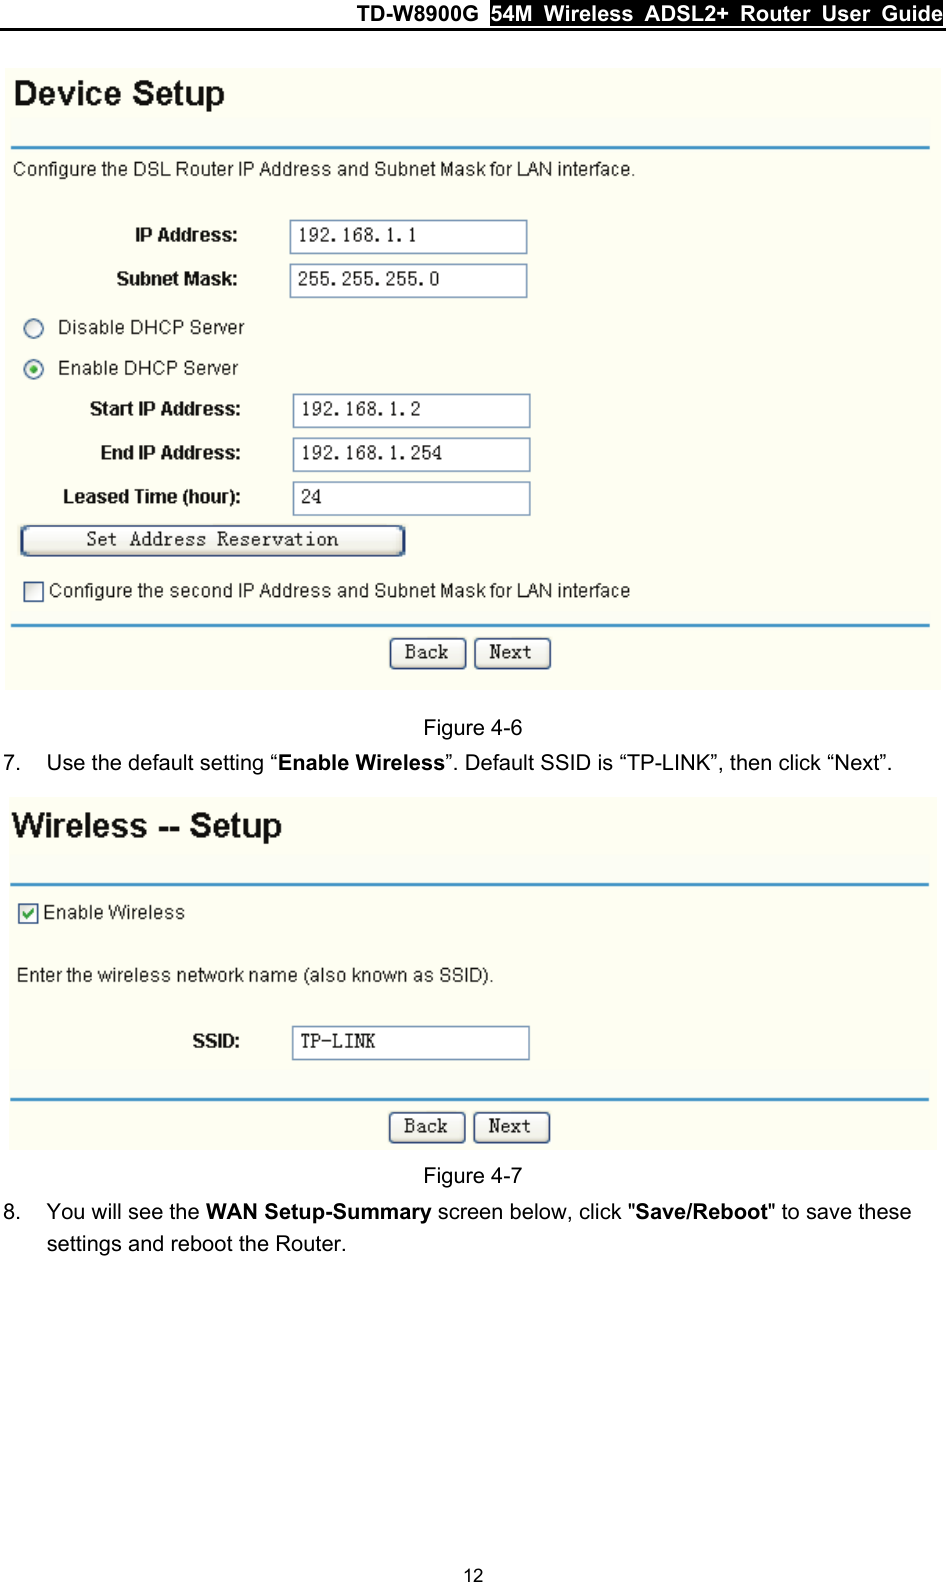 TD-W8900G  54M Wireless ADSL2+ Router User Guide 12  Figure 4-6 7.  Use the default setting “Enable Wireless”. Default SSID is “TP-LINK”, then click “Next”.  Figure 4-7 8.  You will see the WAN Setup-Summary screen below, click &quot;Save/Reboot&quot; to save these settings and reboot the Router. 